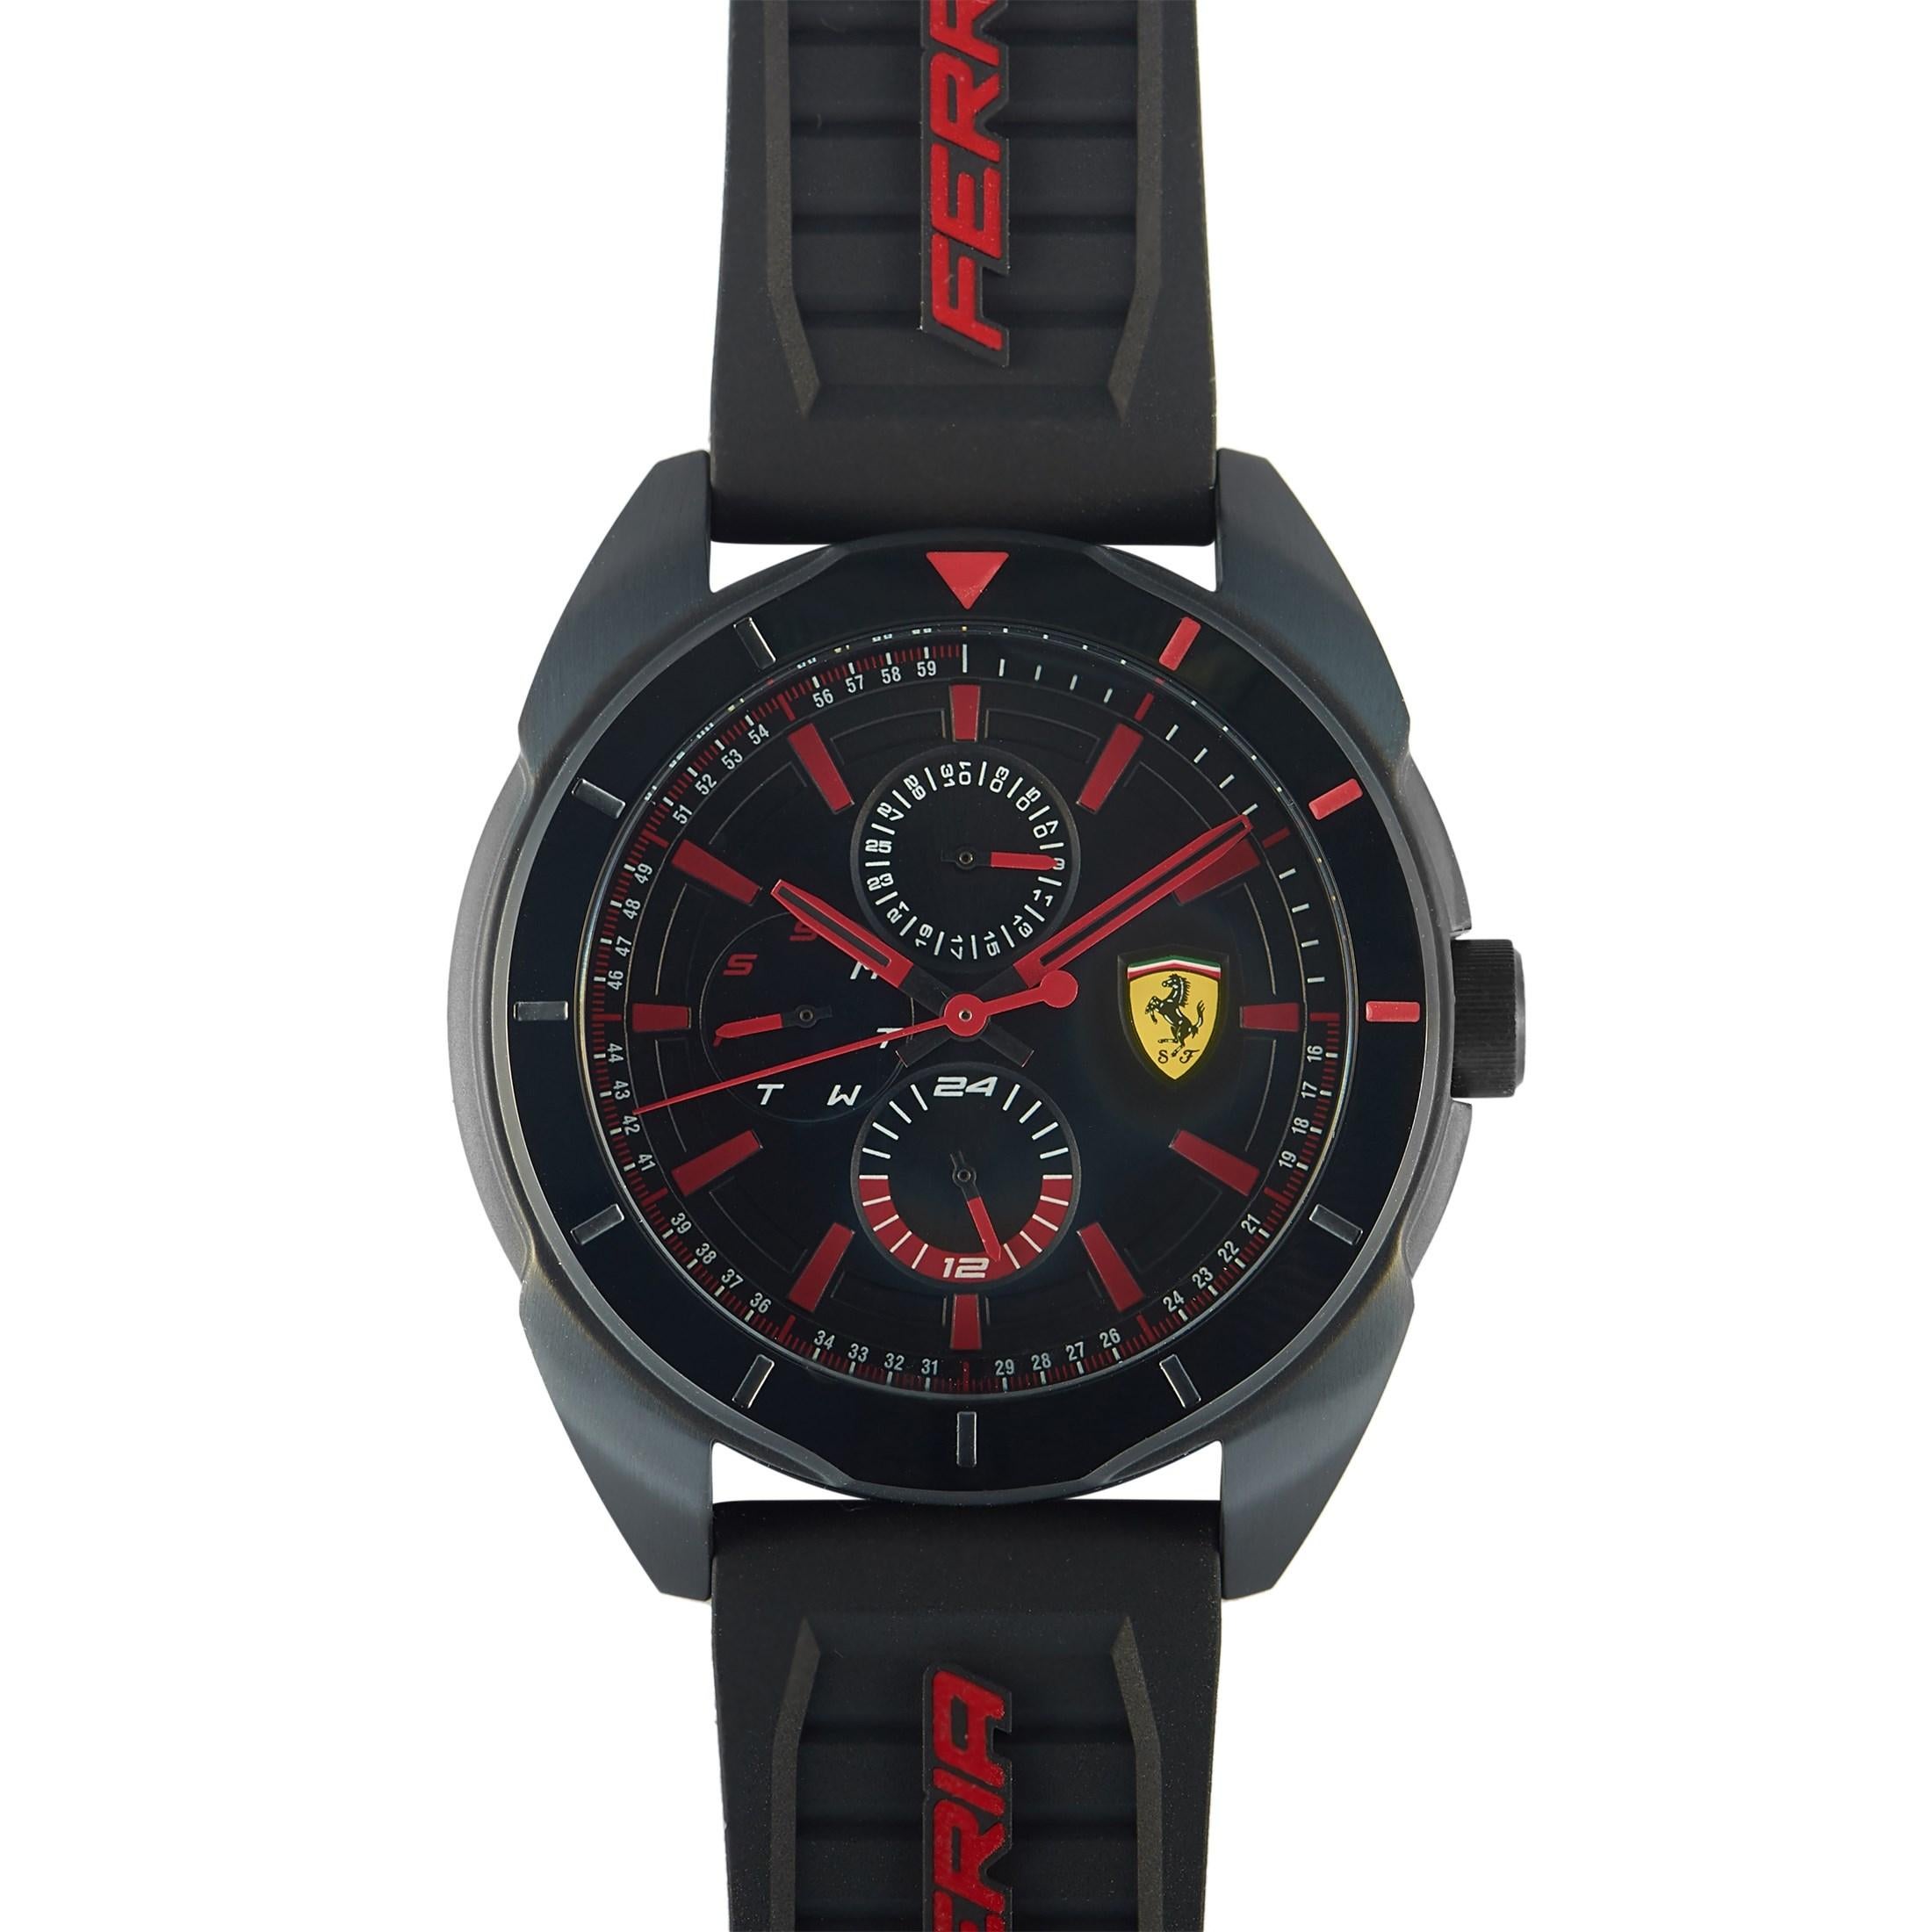 The Ferrari Forza watch, reference number 830547, is presented with a black ion-plated stainless steel case that is water-resistant to 30 meters. The case measures 44 mm in diameter and is mounted onto a black silicone strap, secured on the wrist